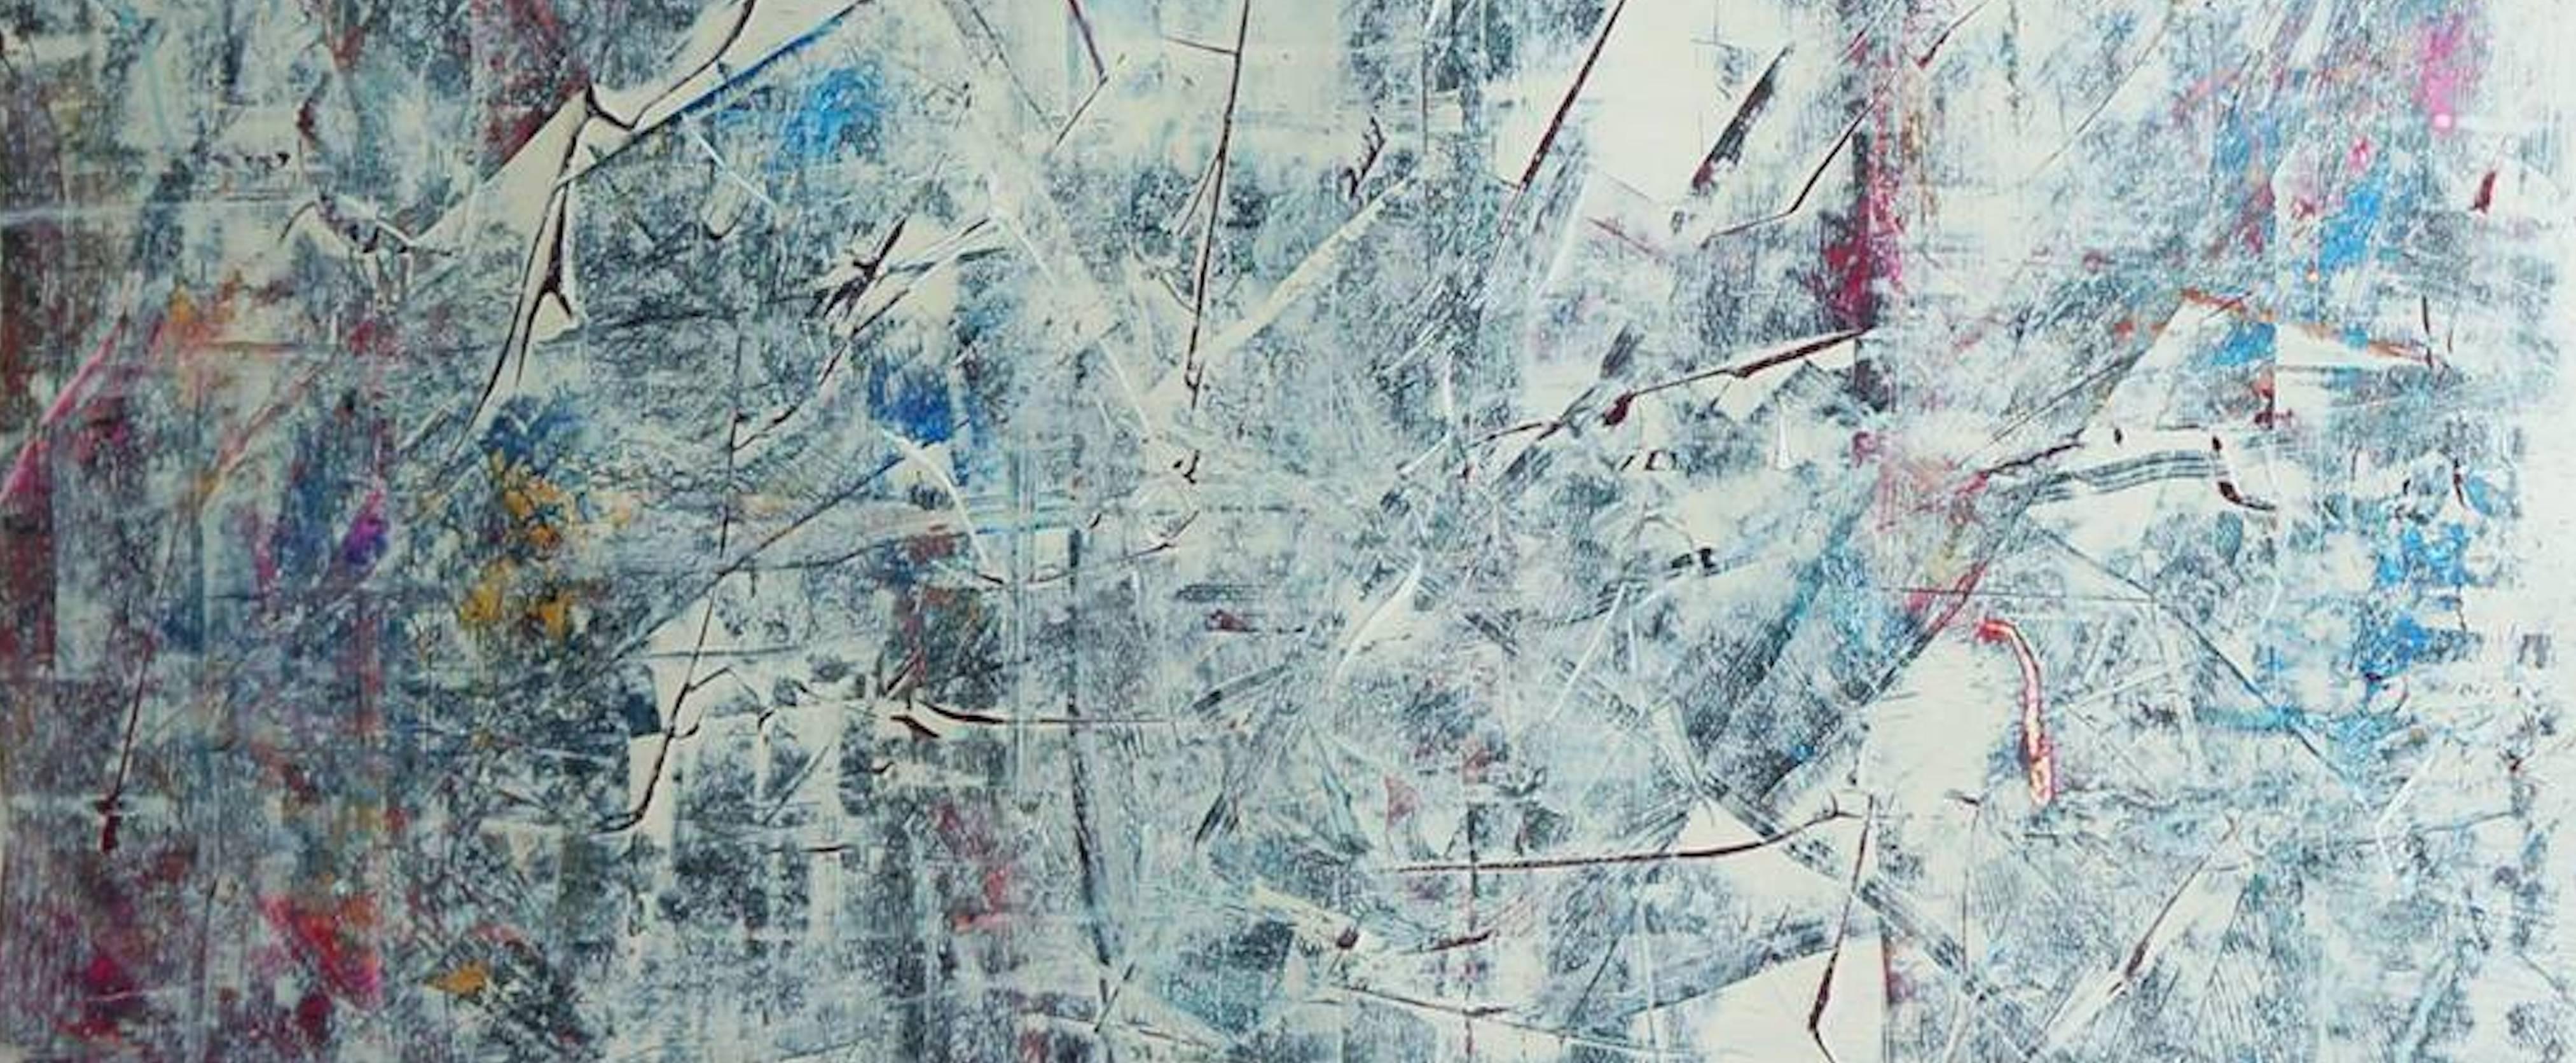 Peeling Away The Layers - Gray Abstract Painting by Eve Ozer